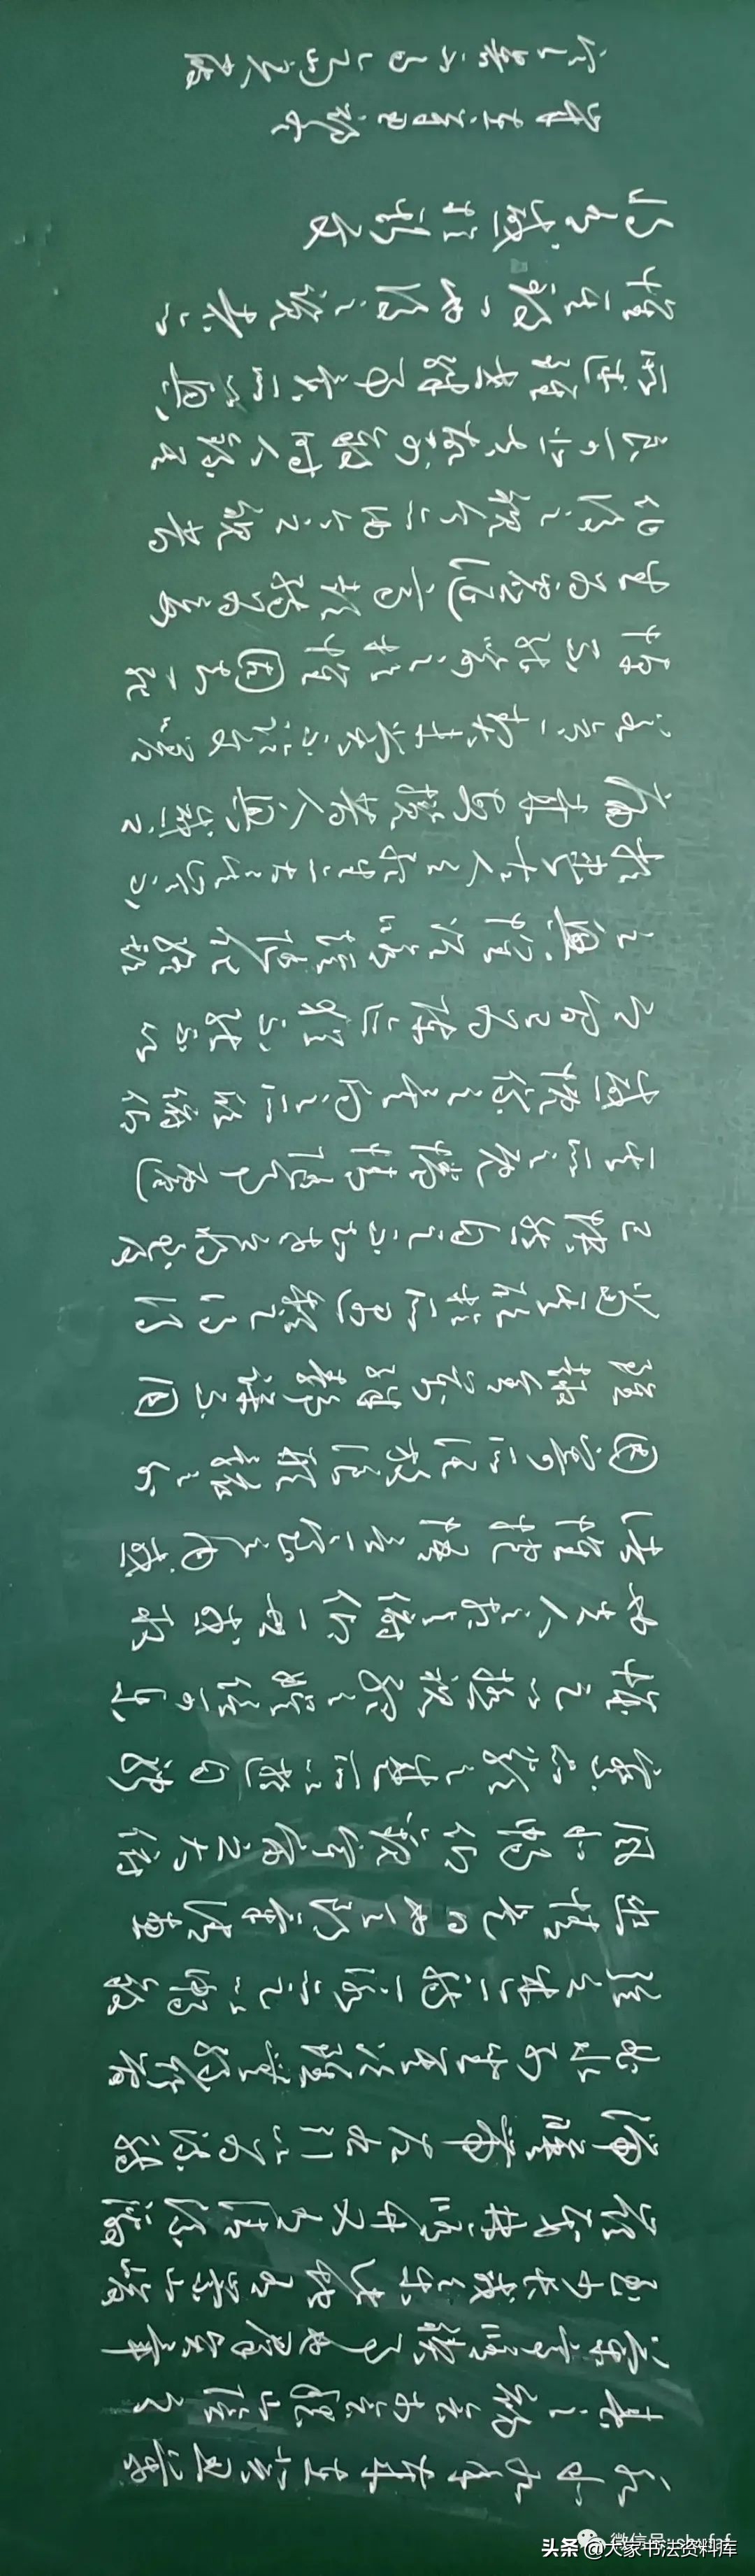 Appreciation of ancient poems with chalk calligraphy: multi-body handwriting in regular script and cursive script